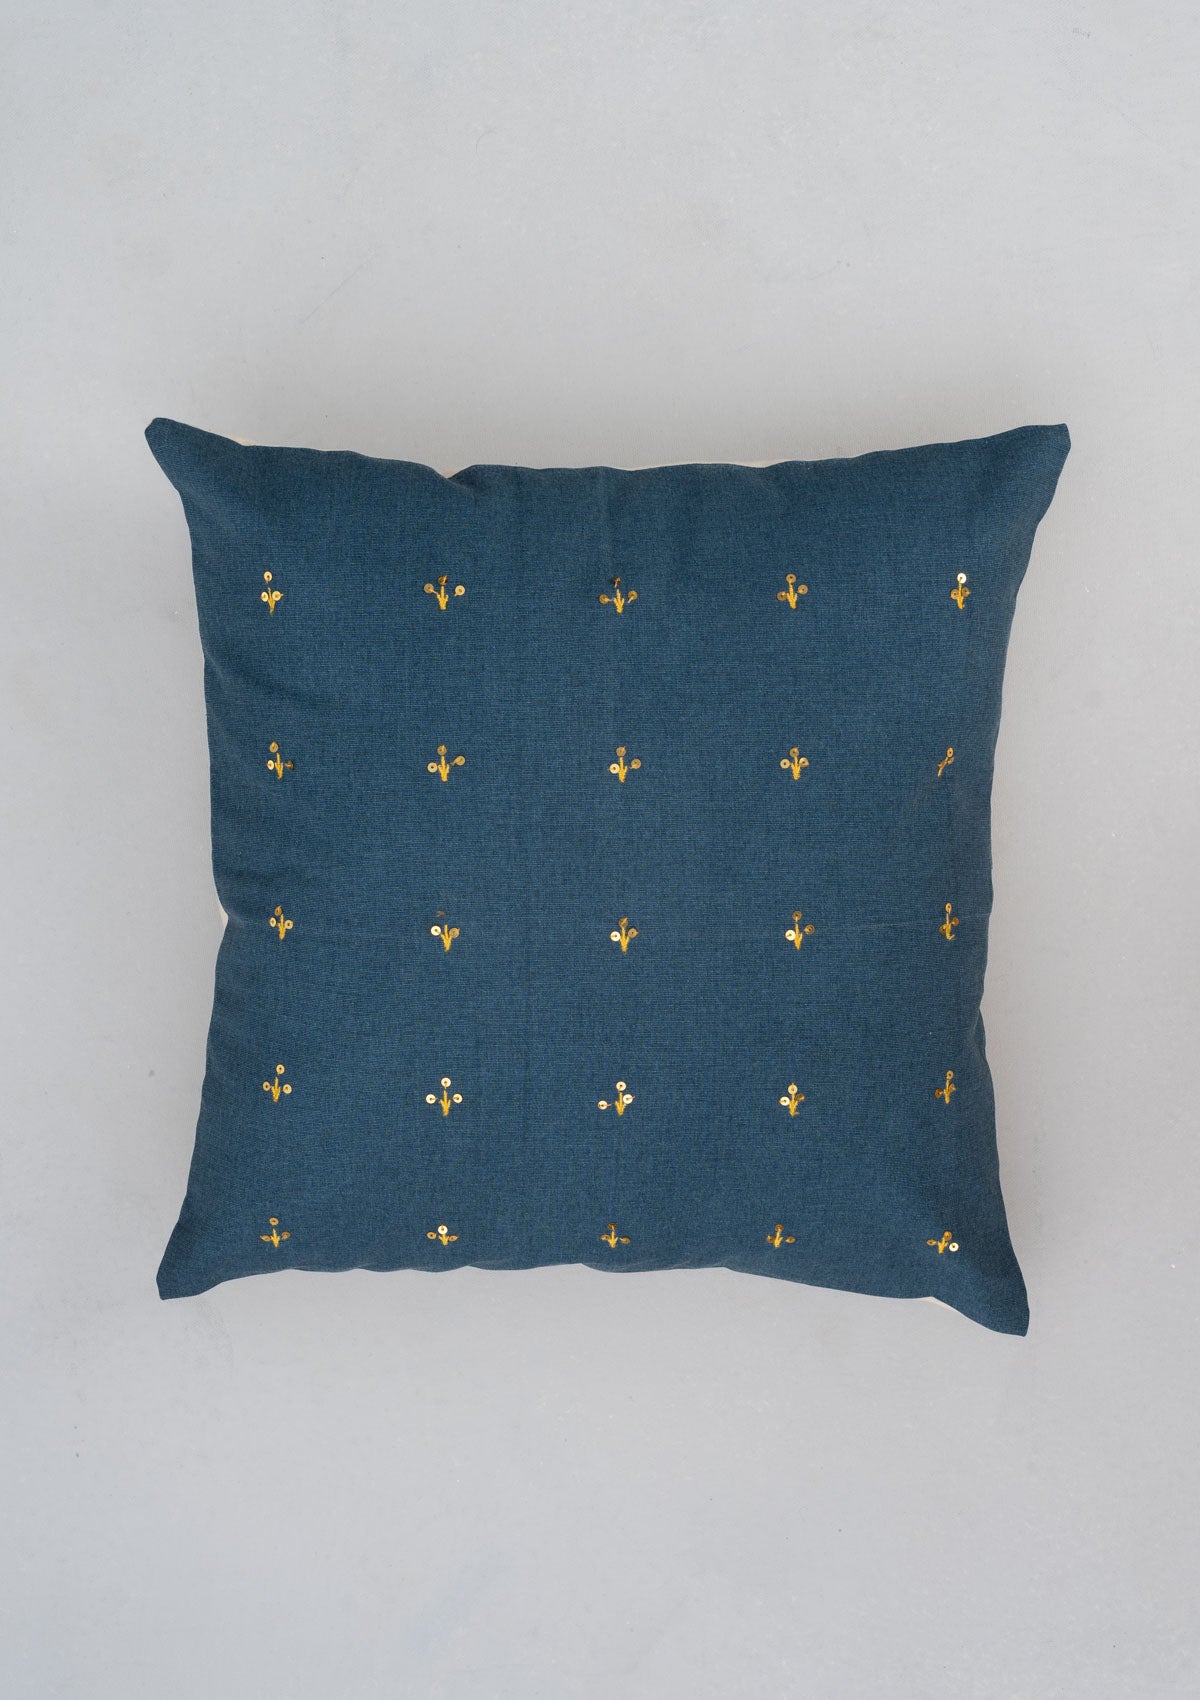 Kohinoor Sequined Cotton Cushion Cover - Night Blue